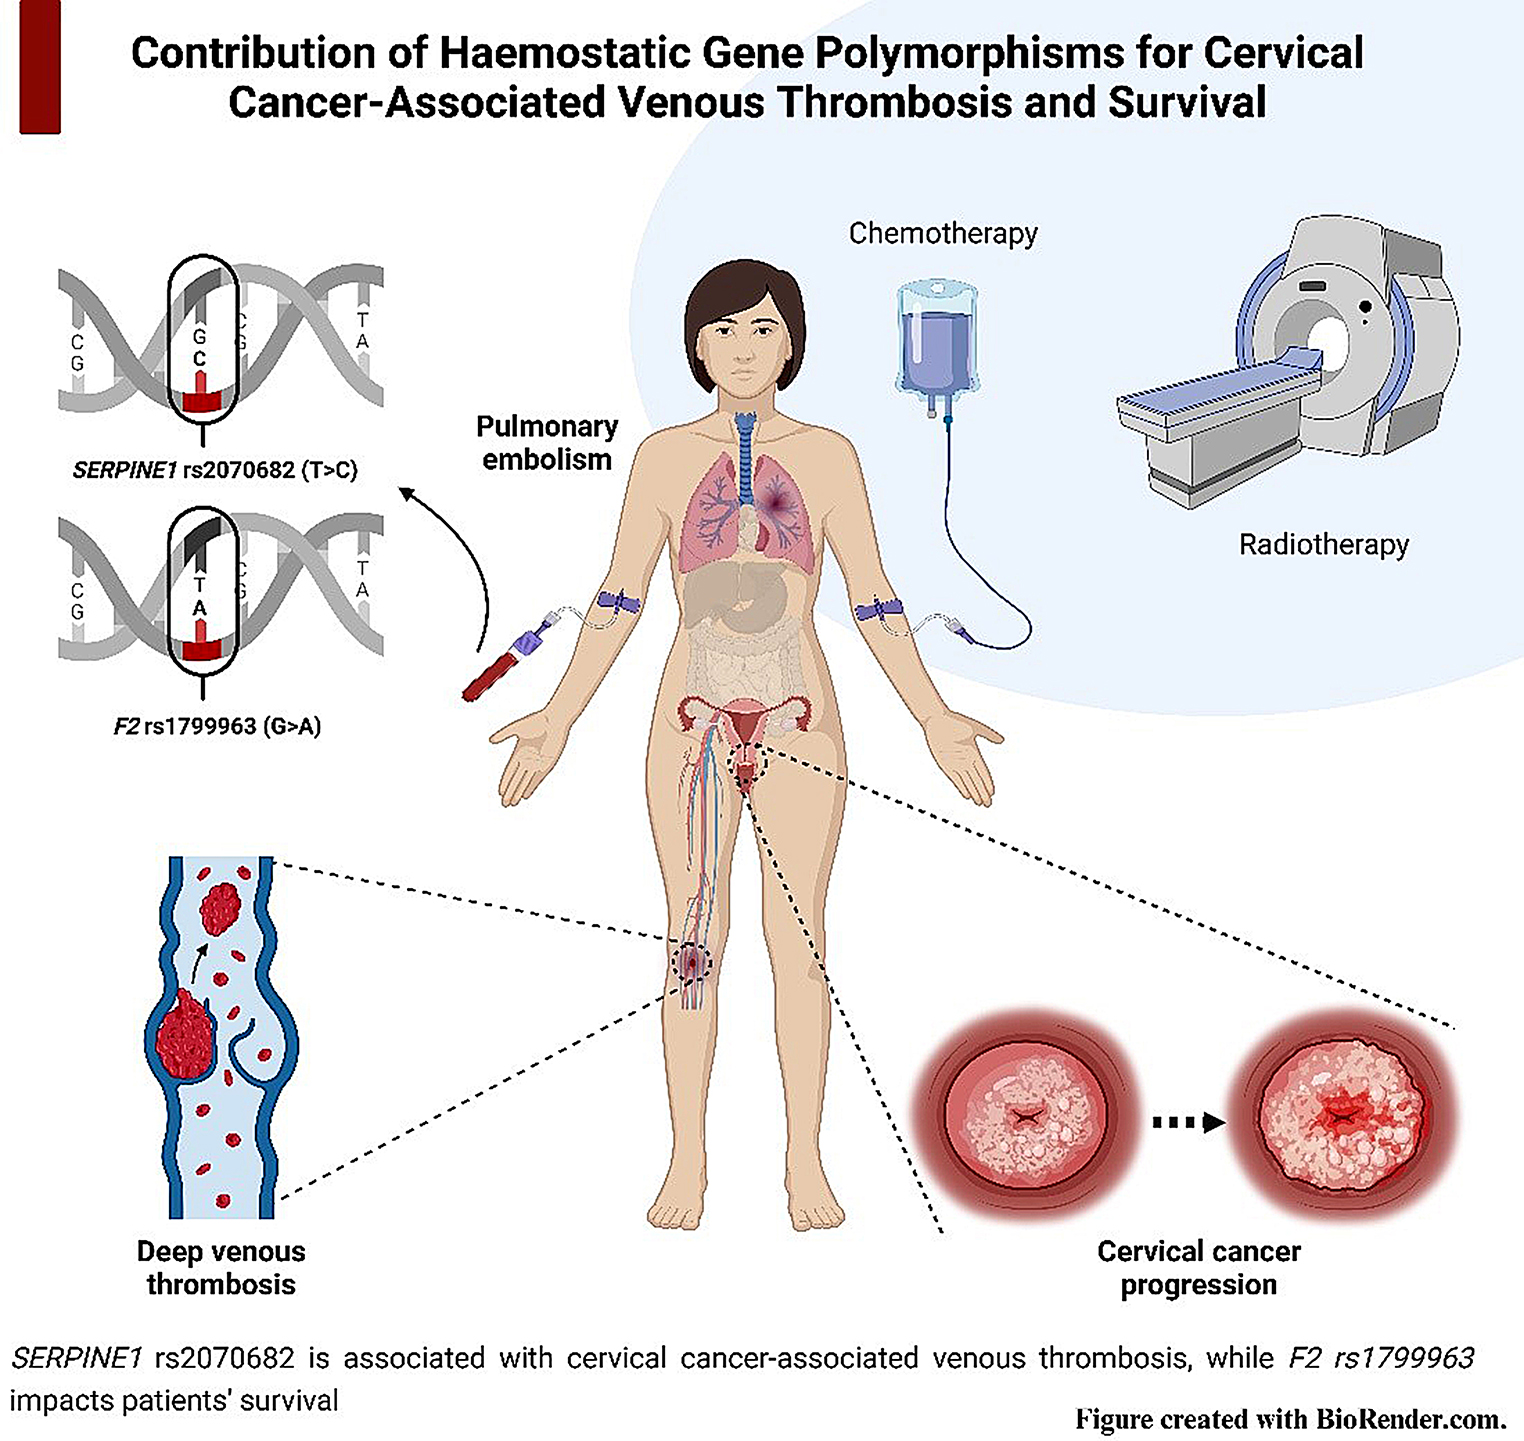 Haemostatic gene variations in cervical cancer-associated venous thrombosis: considerations for clinical strategies